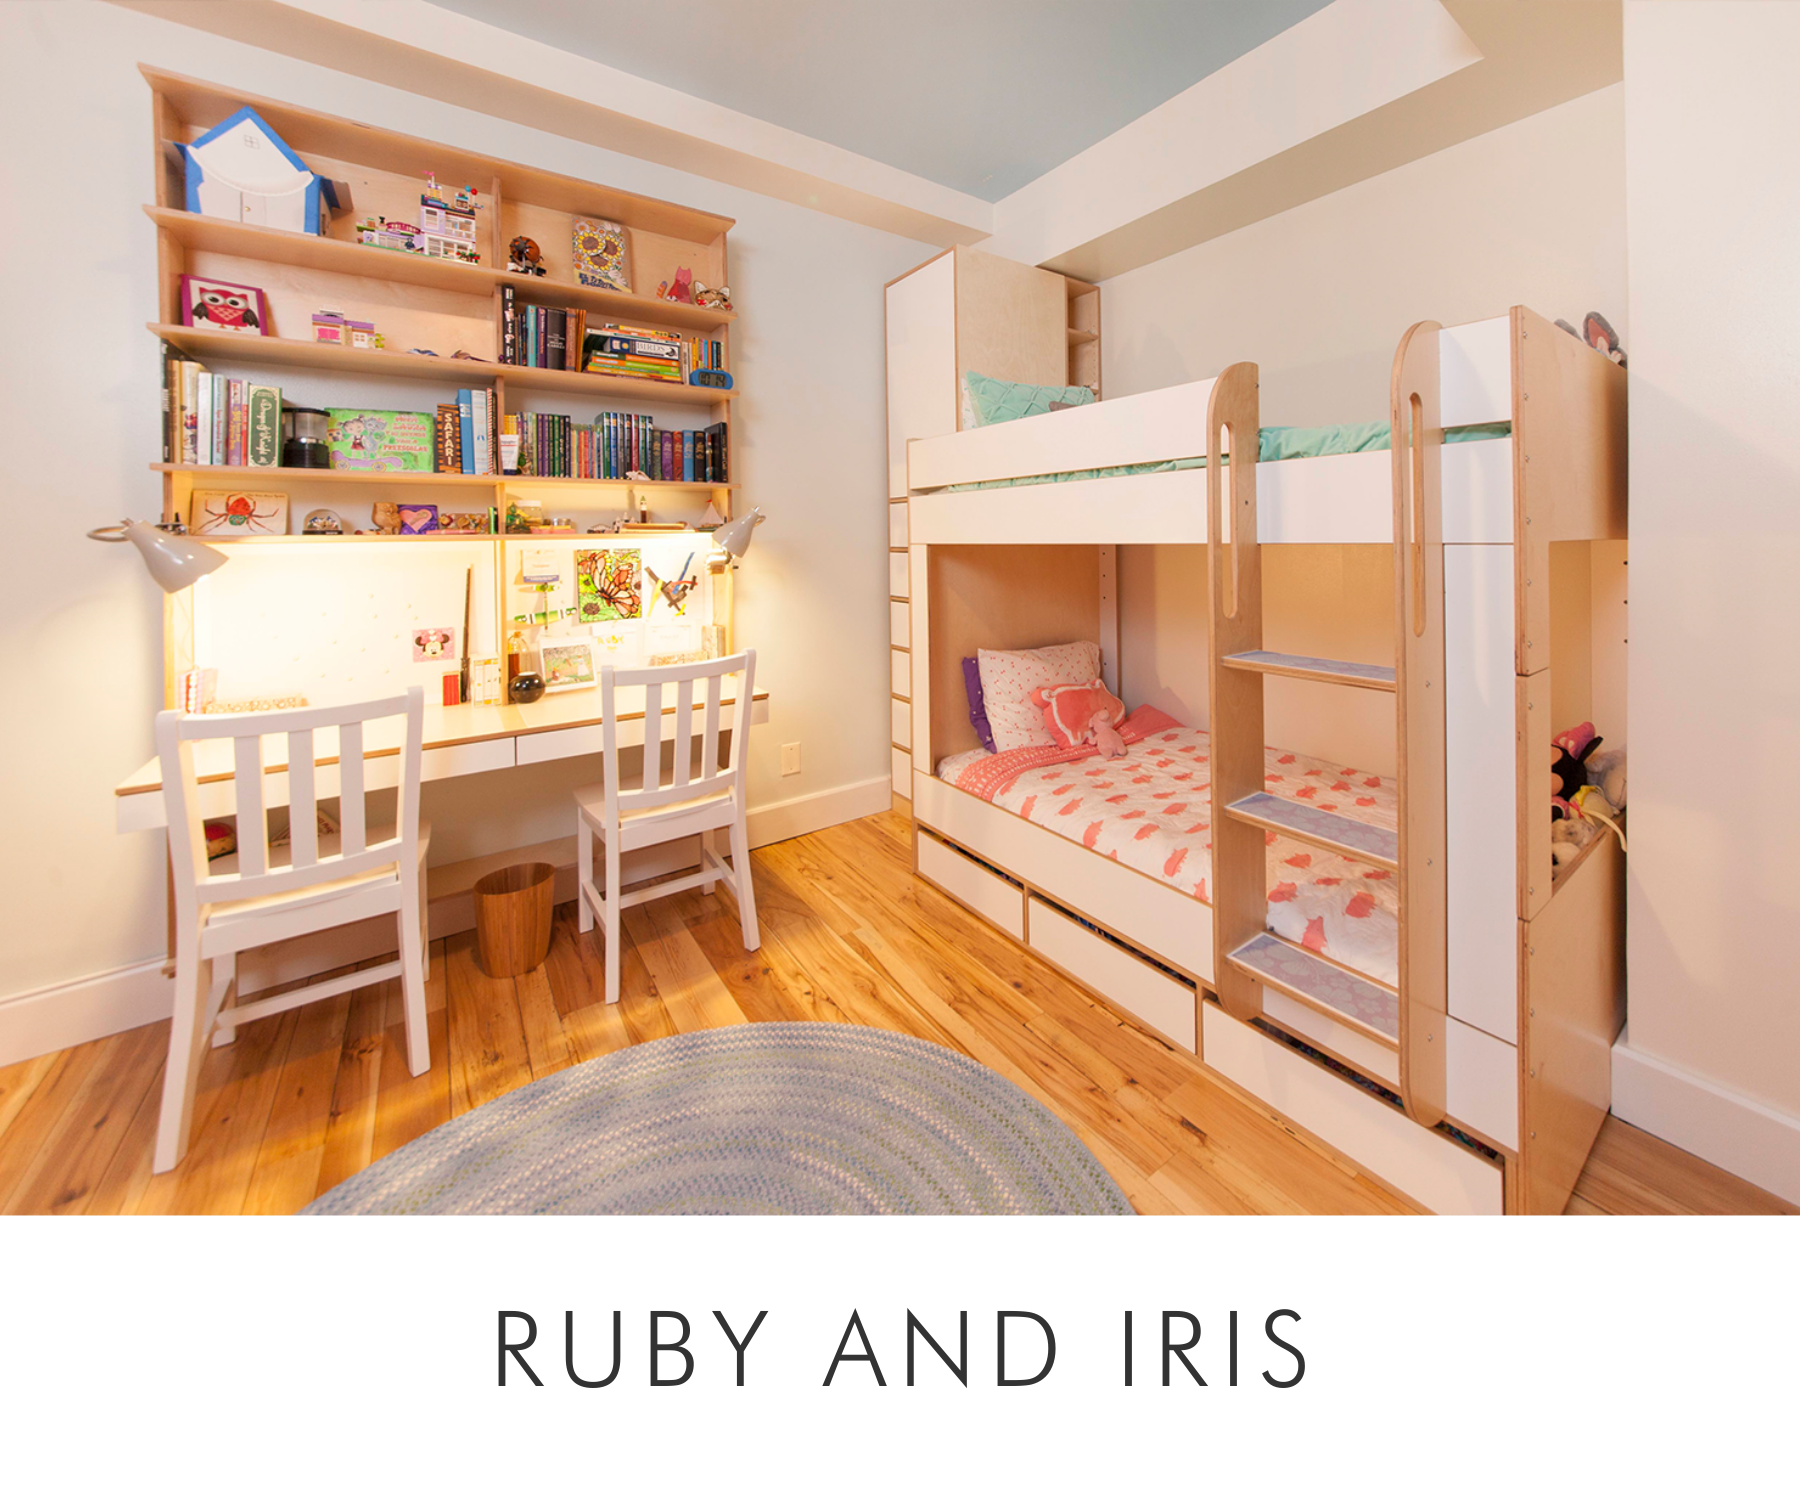 Ruby and iris cozy children's room with bunk beds, a study area with two chairs, and wooden shelves.